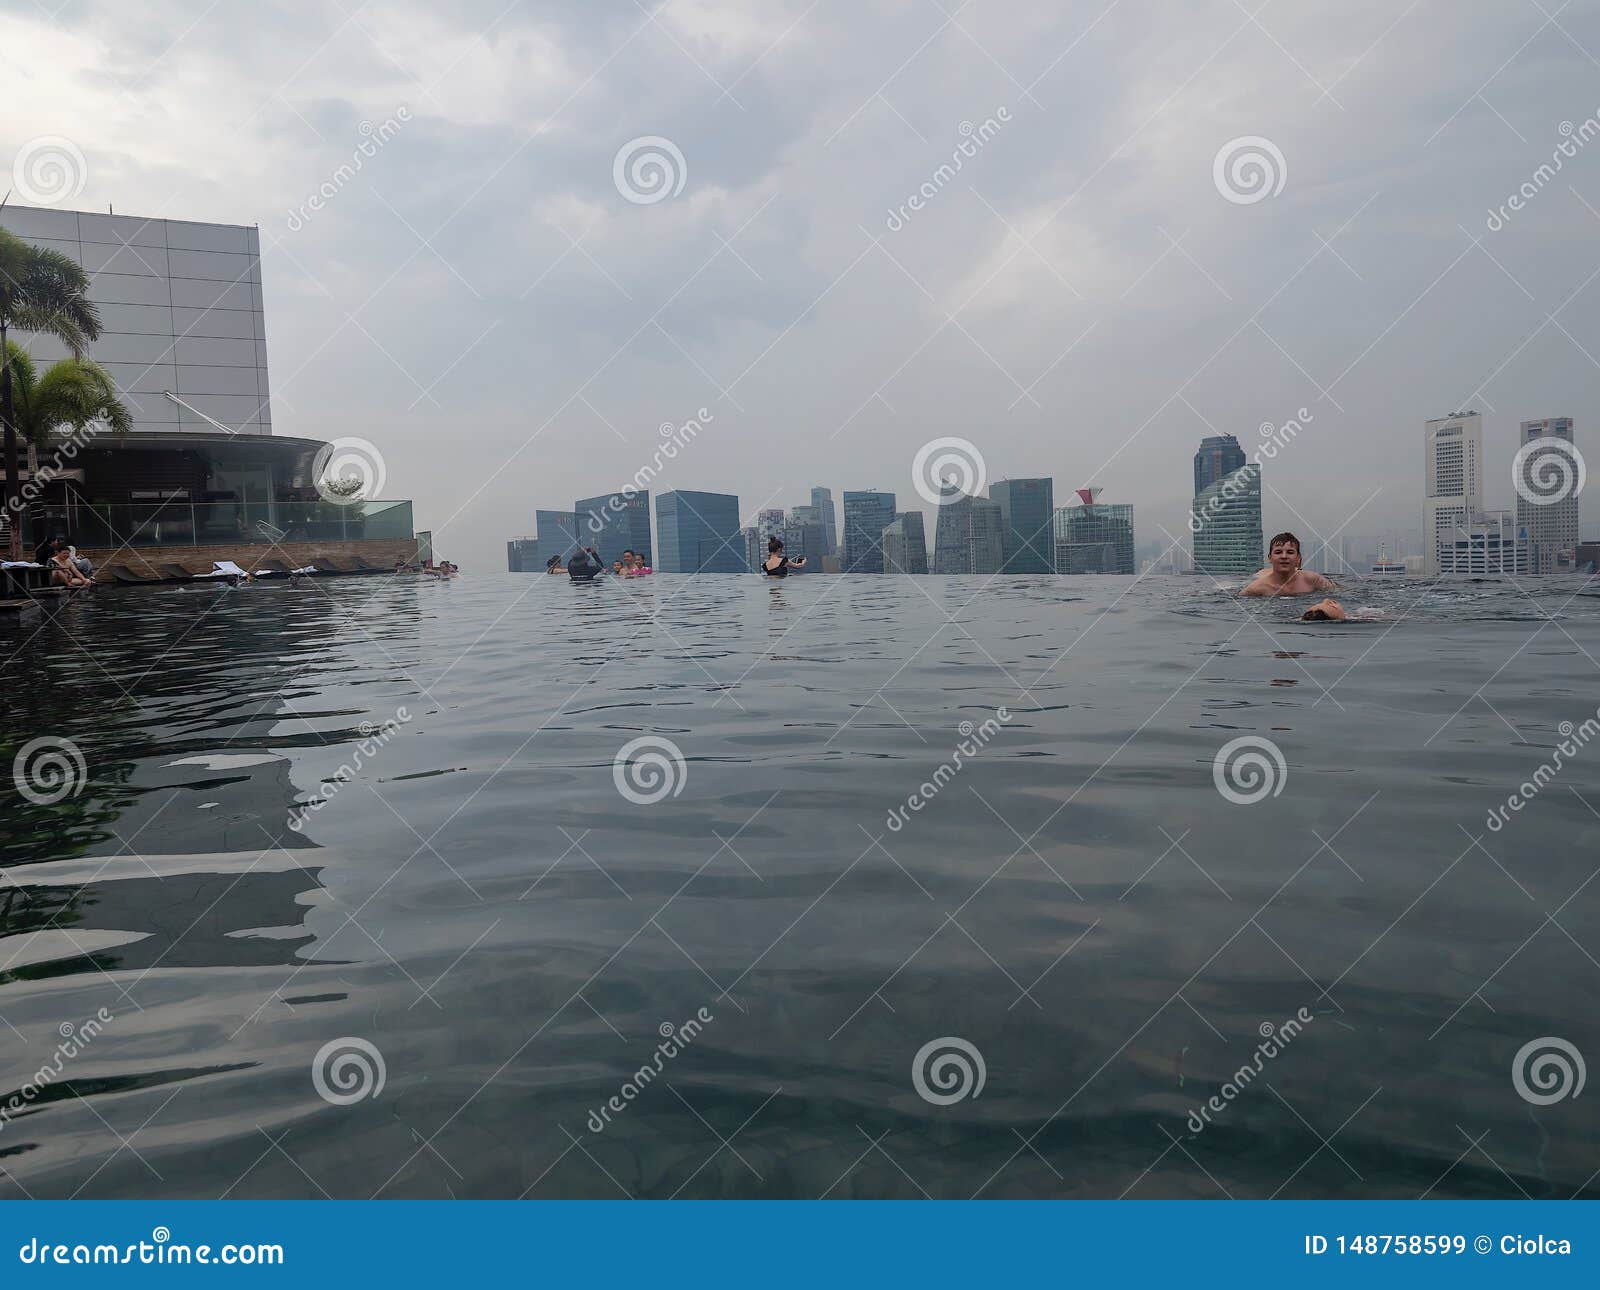 People Relaxing At The Marina Bay Sands Hotel Pool Singapore